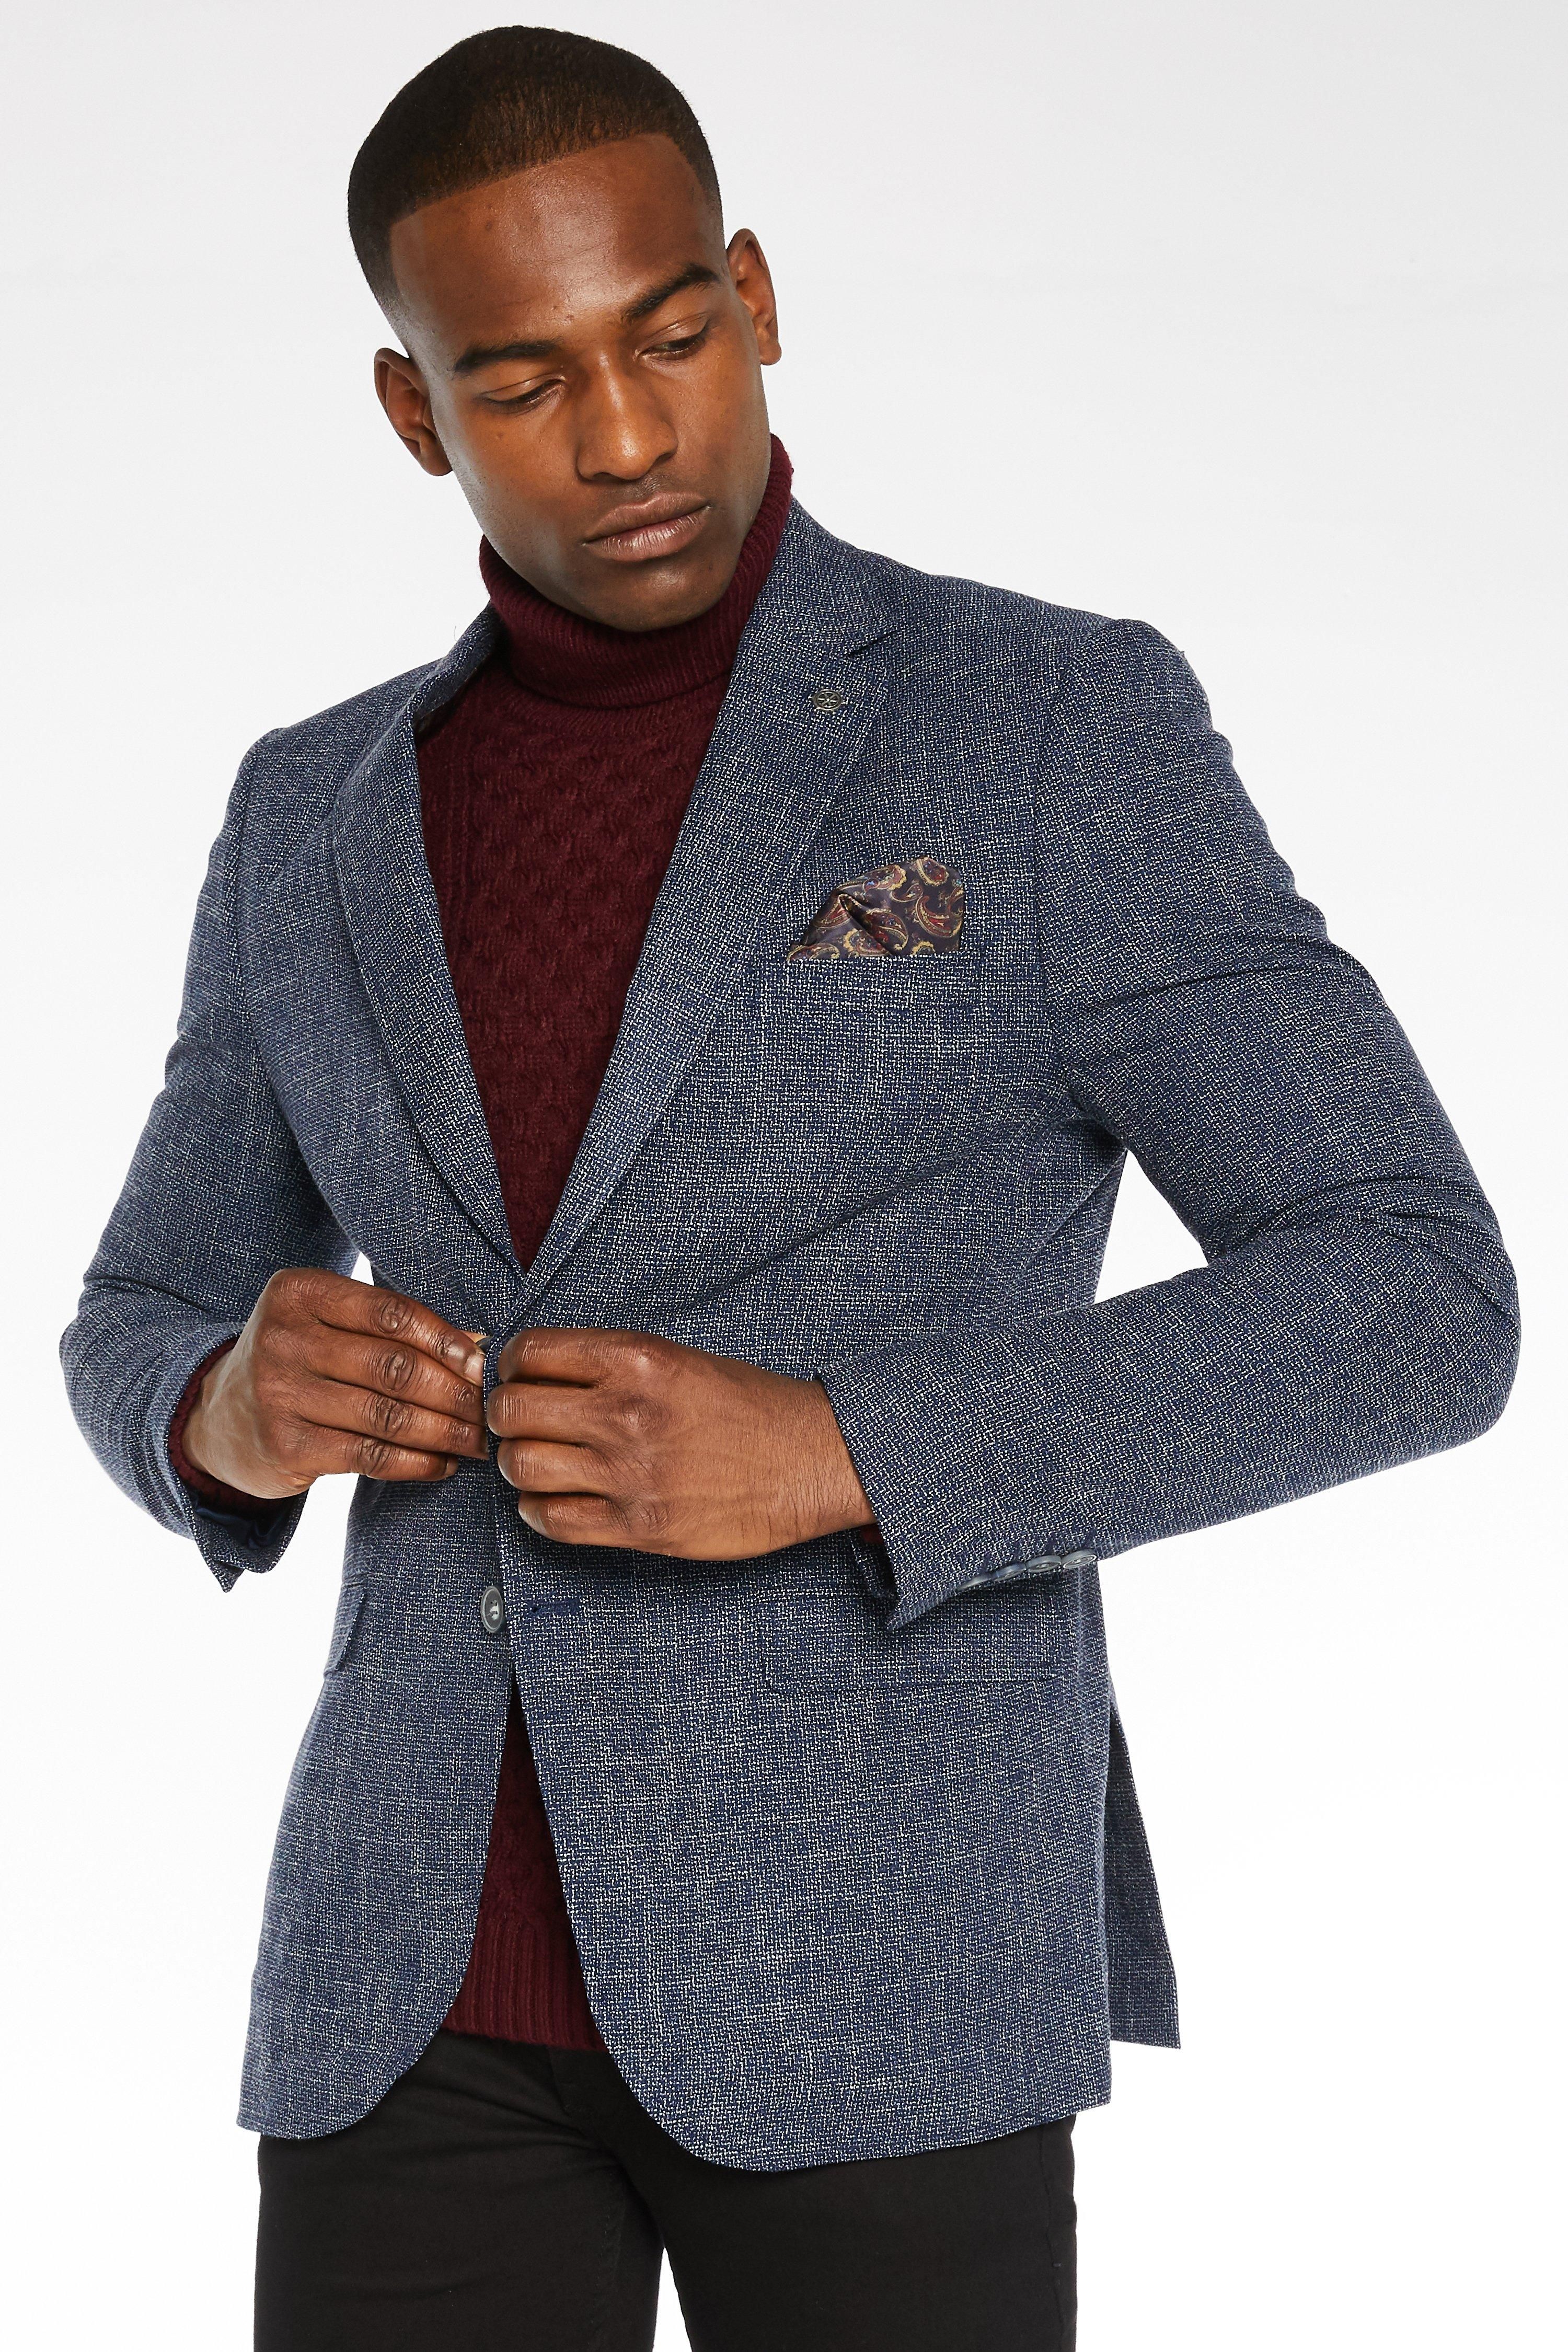 - Fleck Design  - Lined with Internal Pockets and Pocket Square  - Peaked Lapel  - Double Vented Back  - Fuctional Pockets